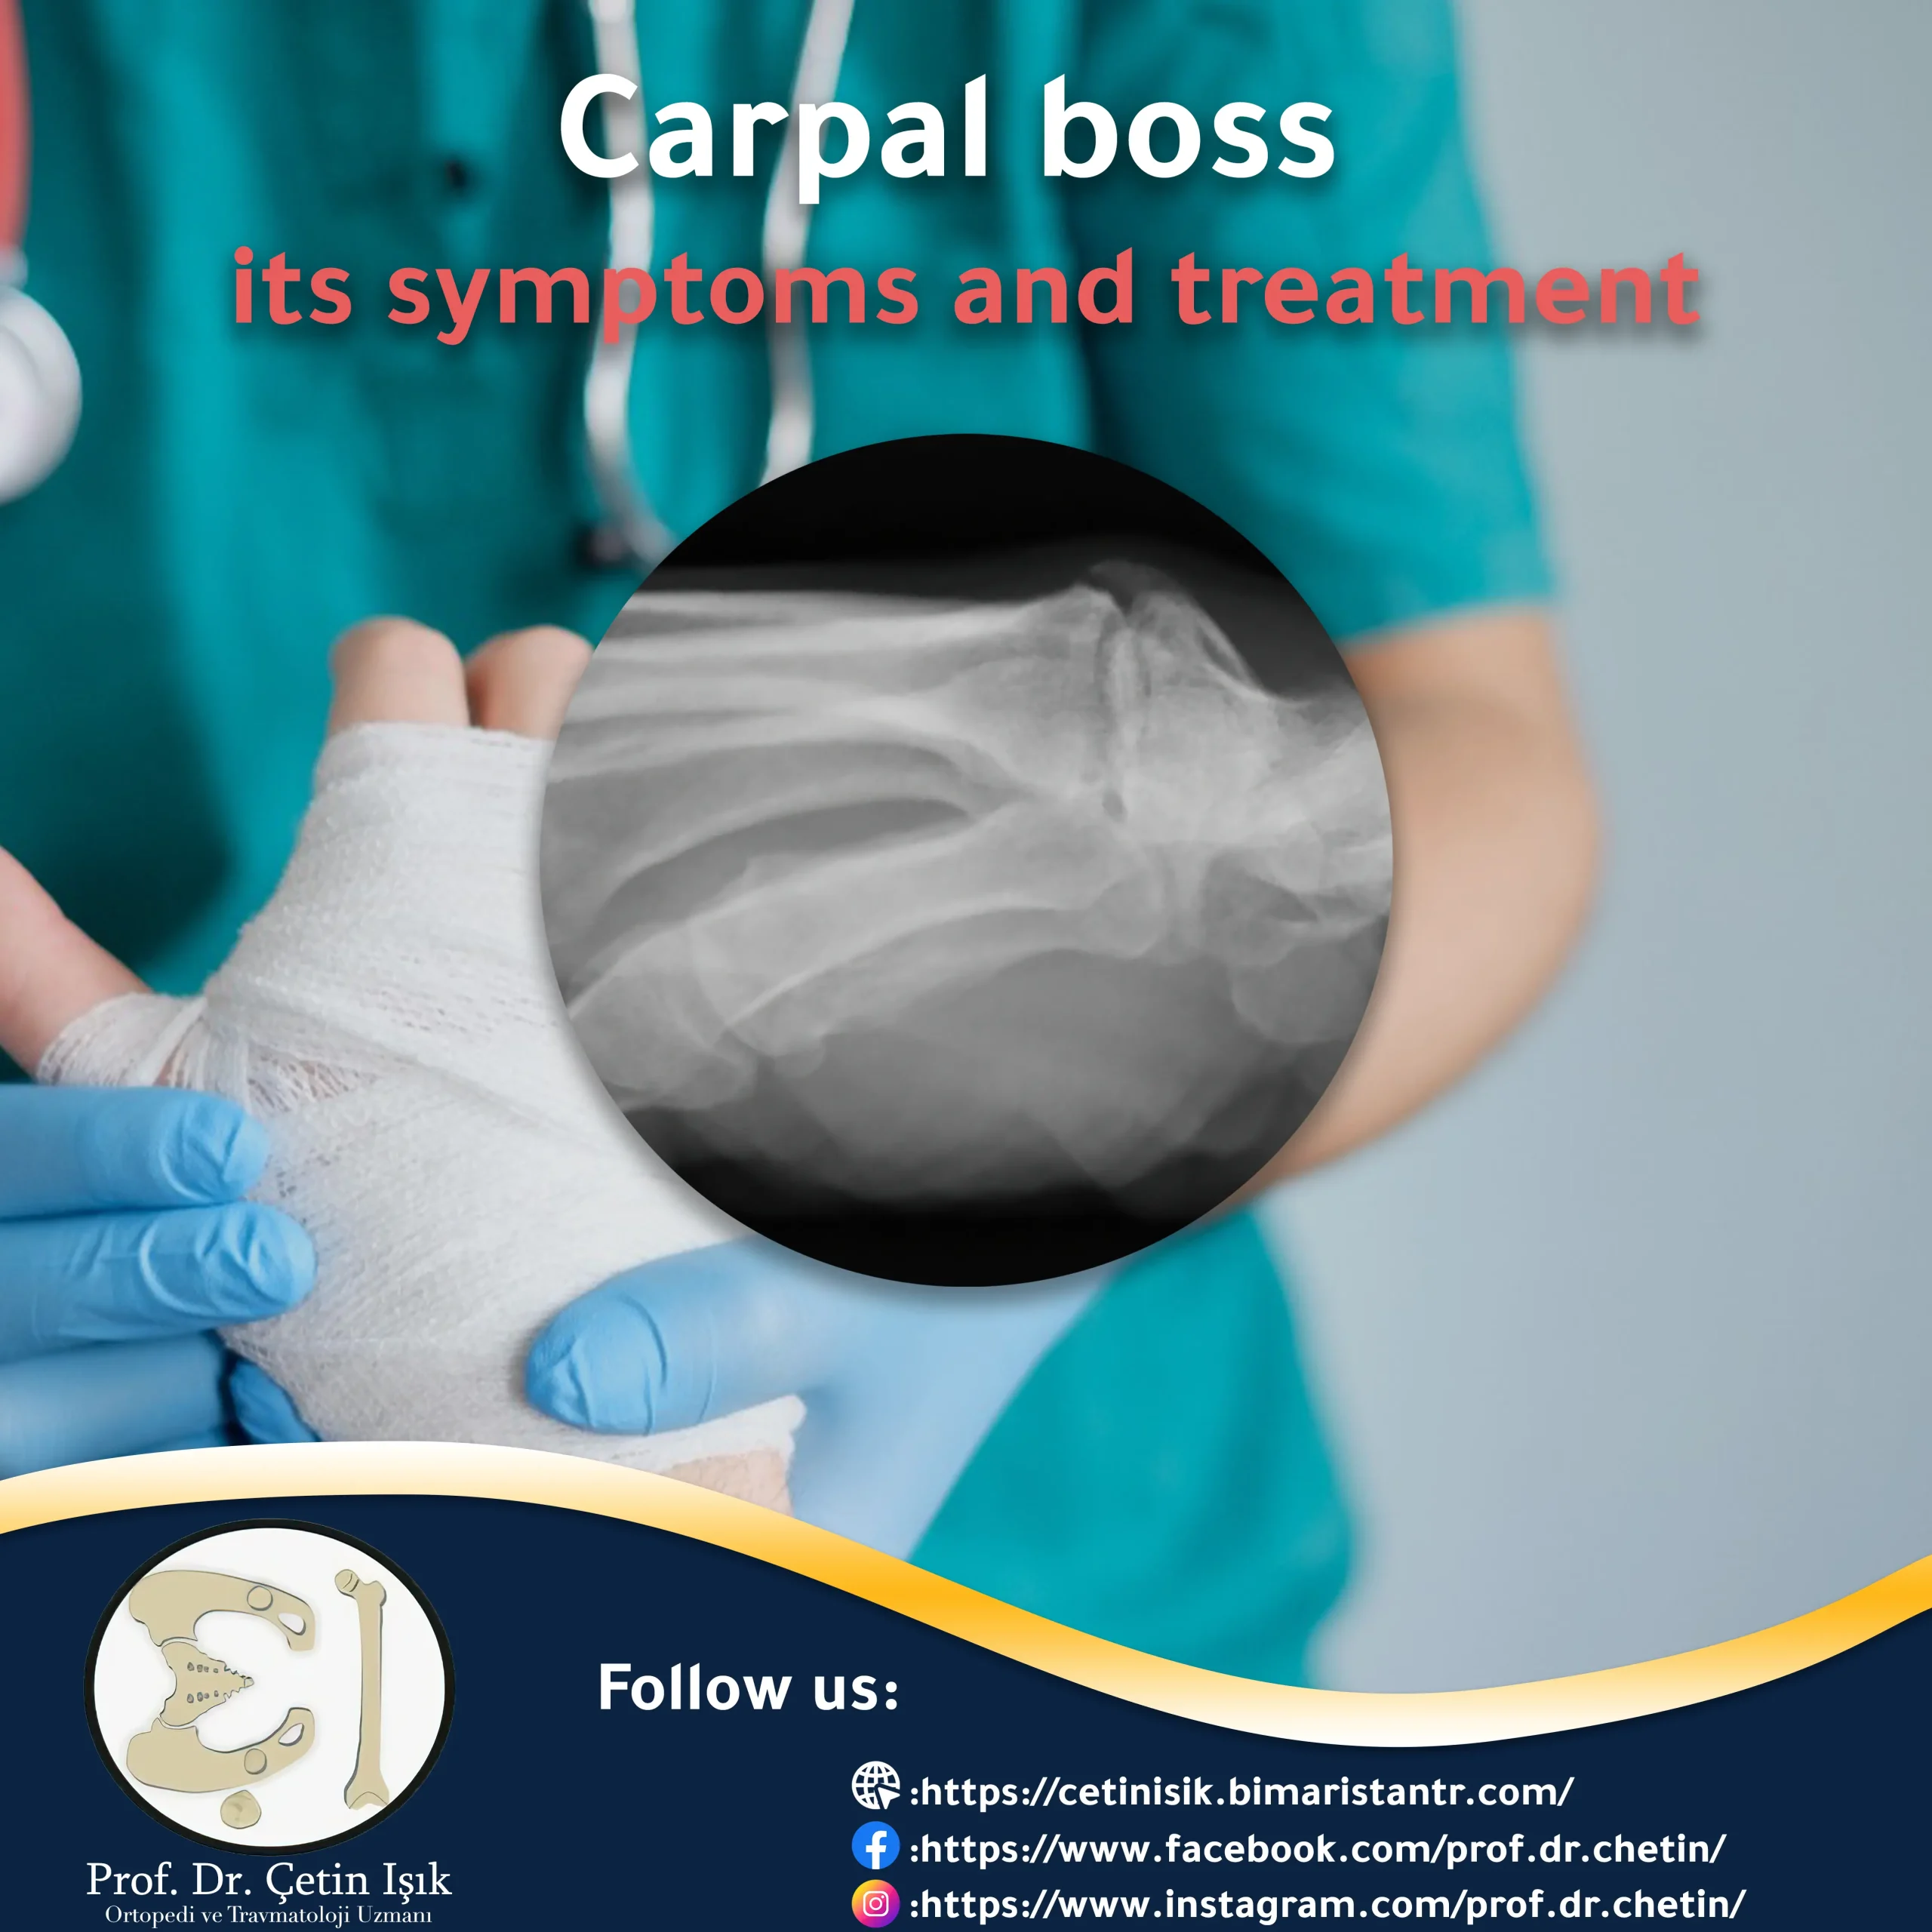 Carpal boss; Is it a serious problem?